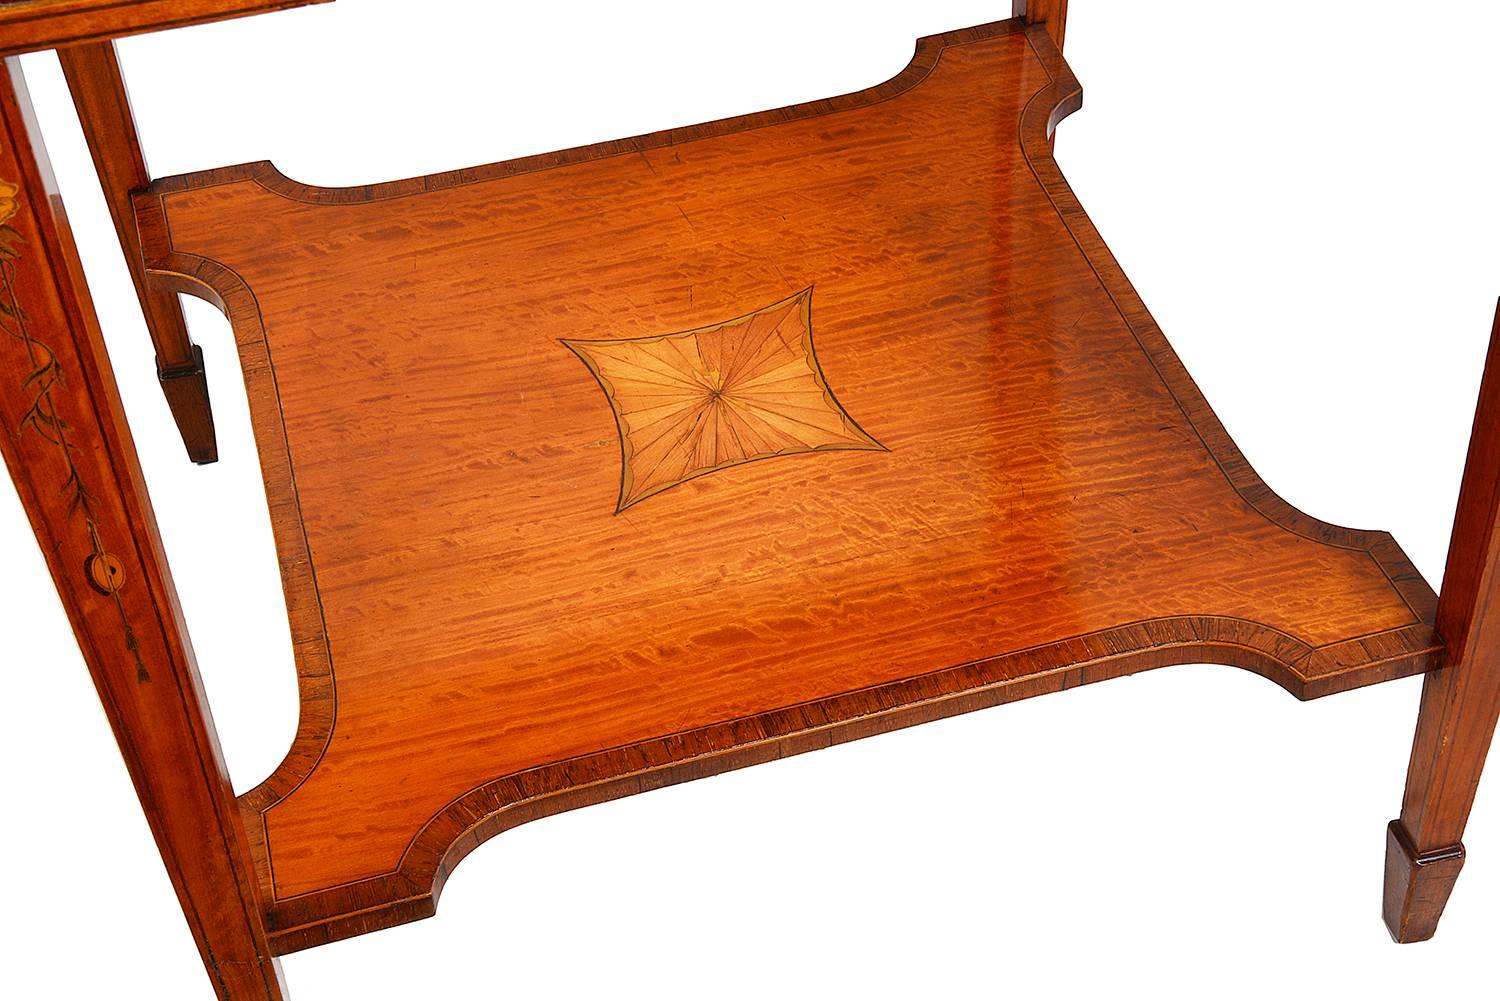 A fine quality Edwardian period Satinwood envelope card table, having classical inlaid decoration to the top, frieze and legs. It has a single frieze drawer, raised on square tapering legs and an under-tier.